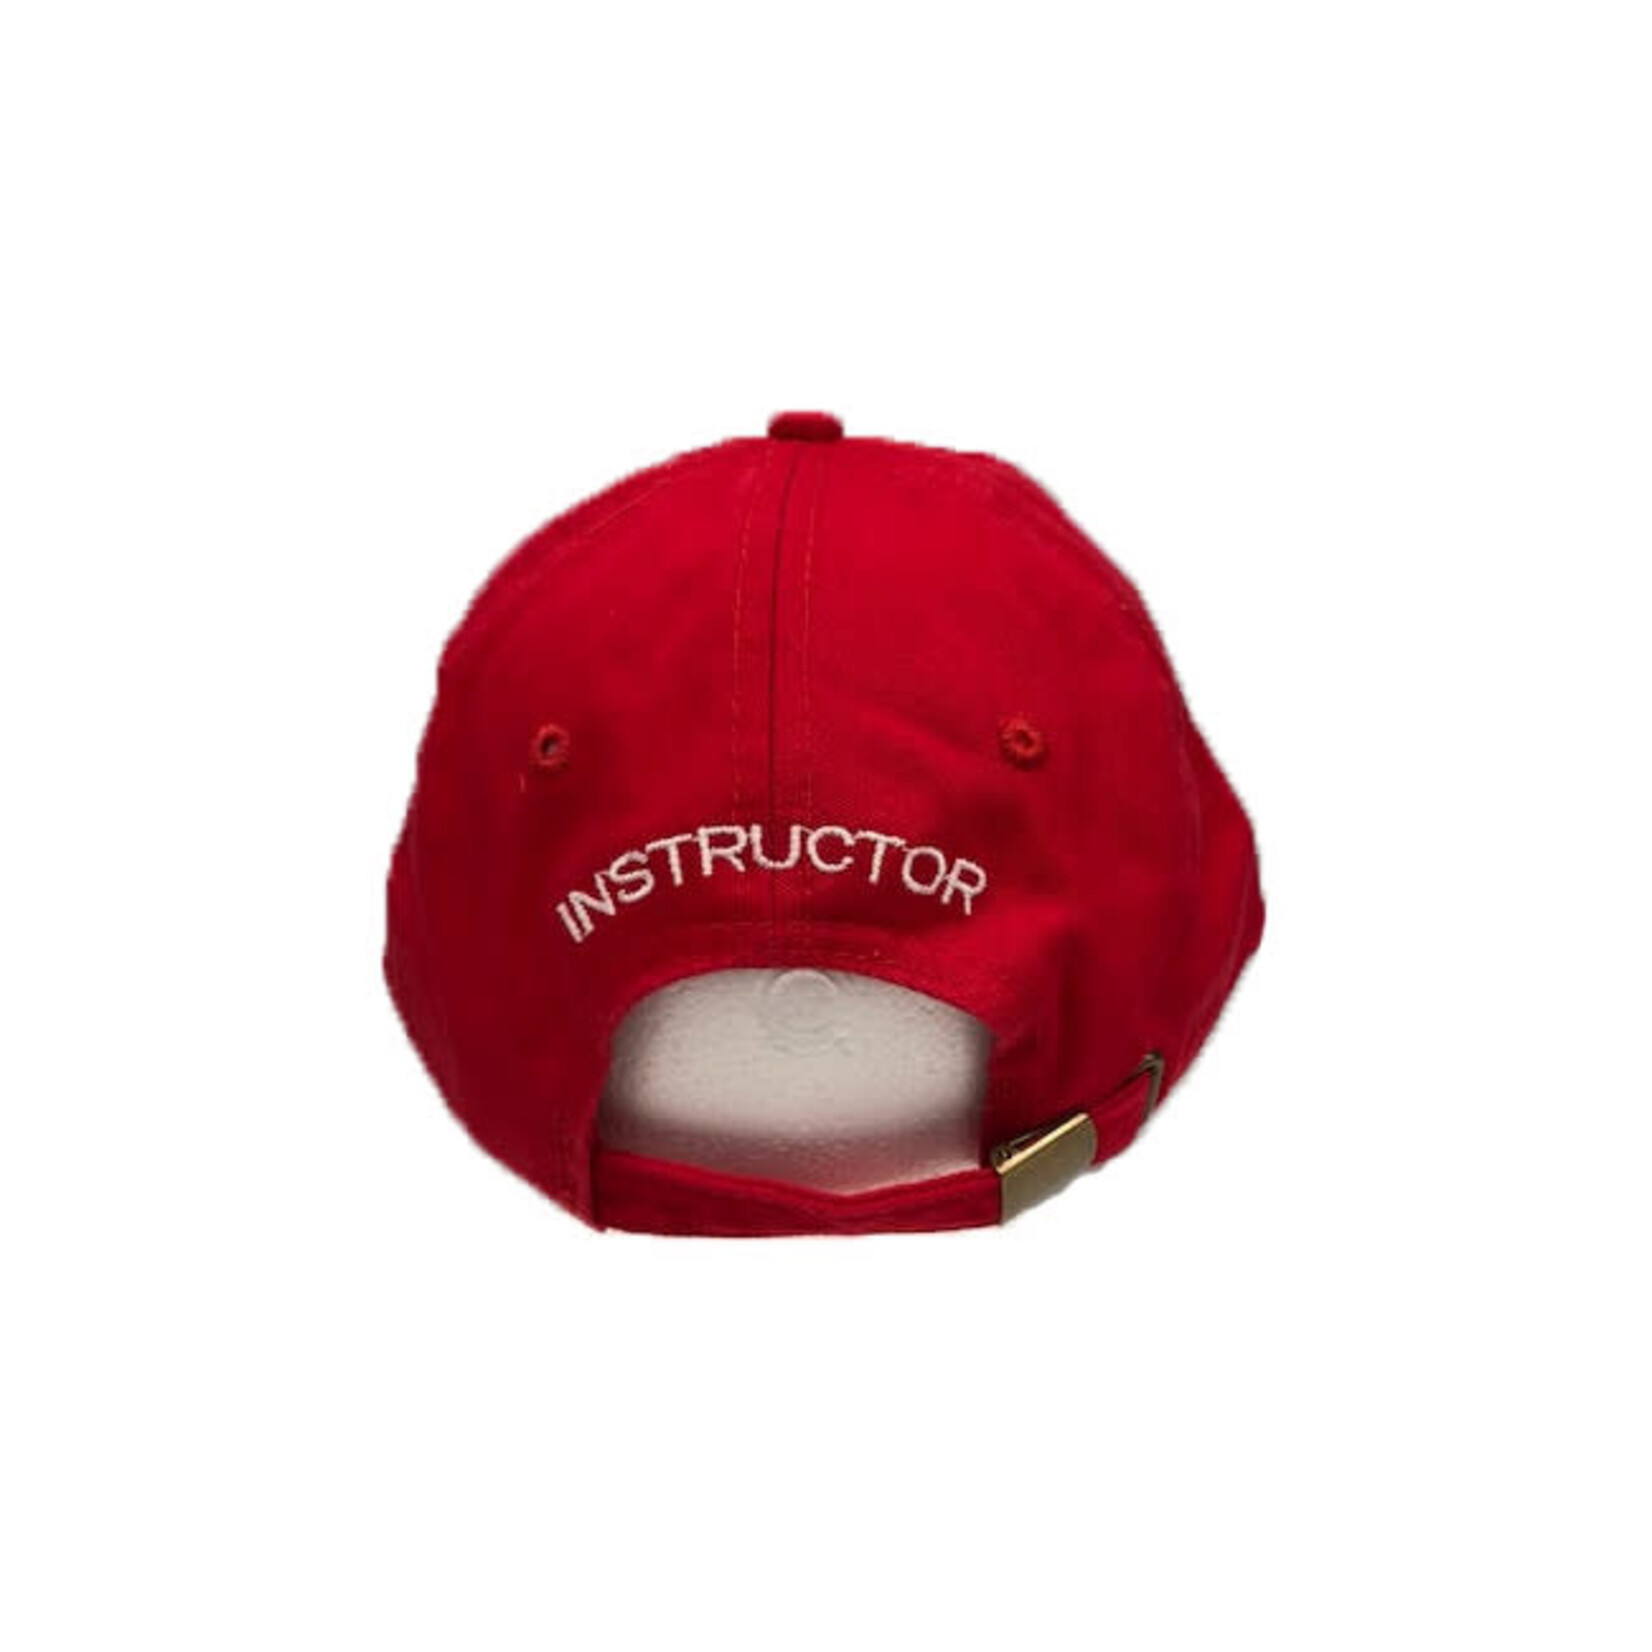 Red Powerboating Instructor Hat